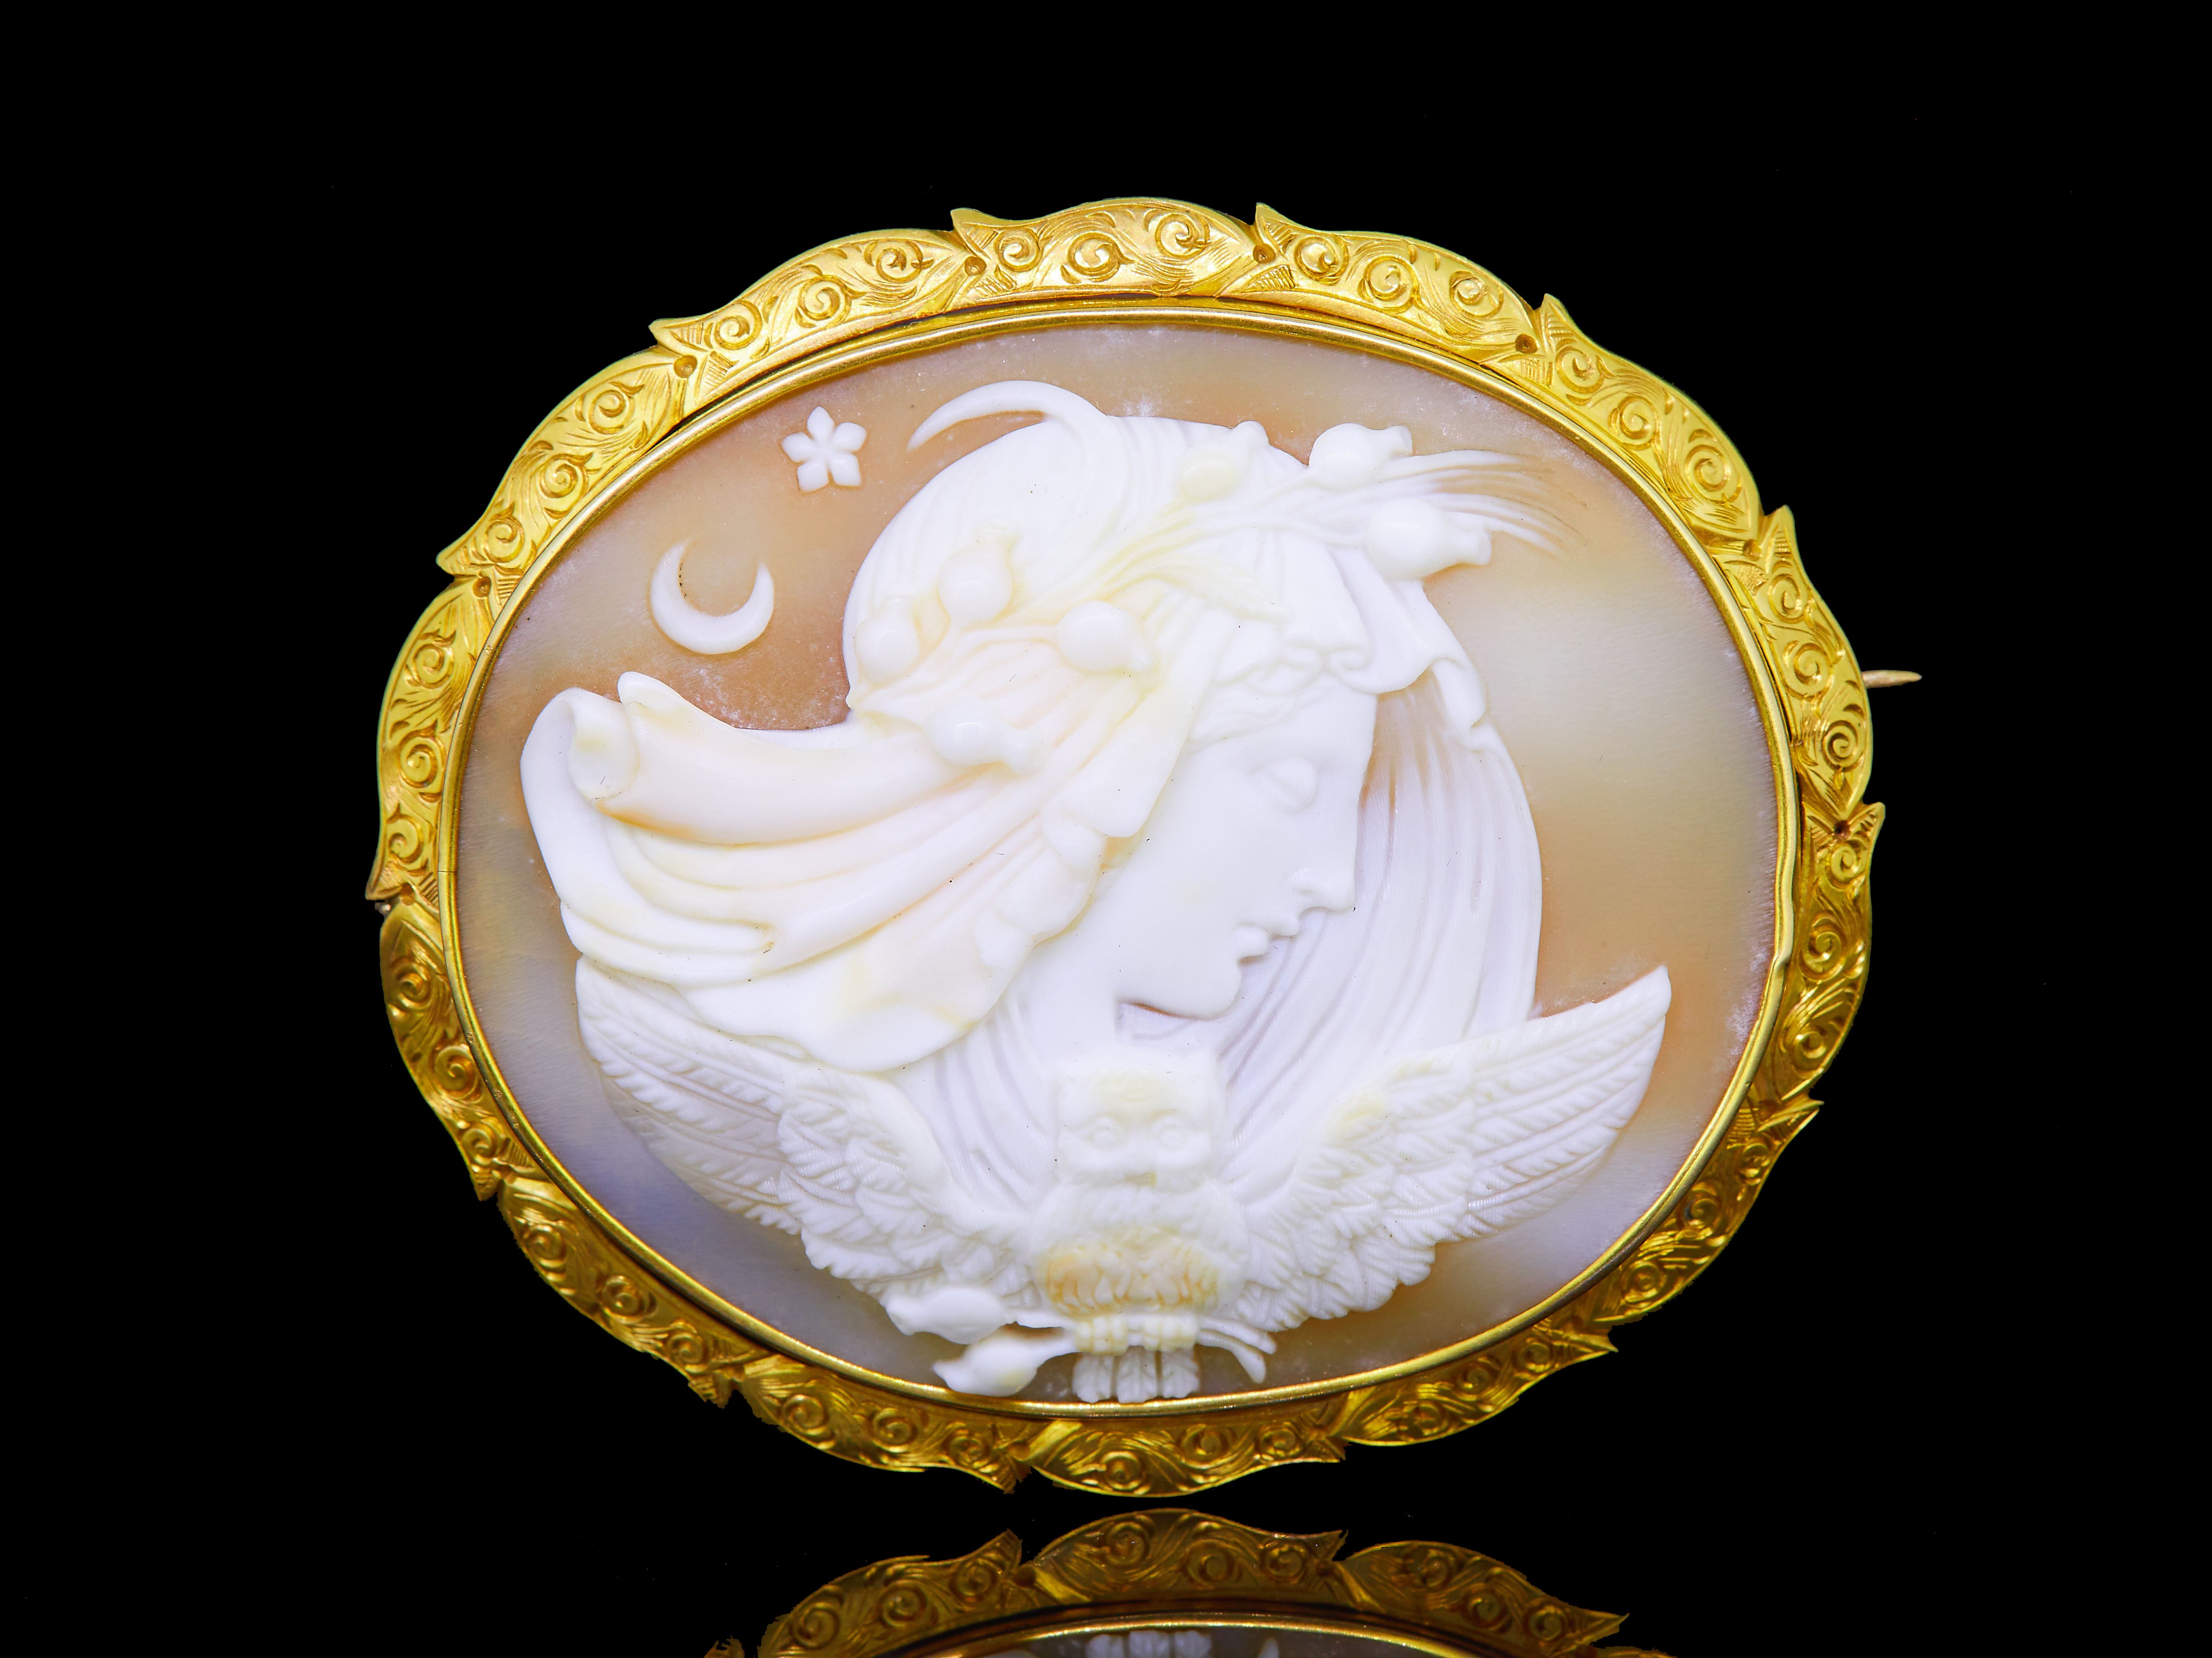 ANTIQUE VICTORIAN SHELL CAMEO BROOCH